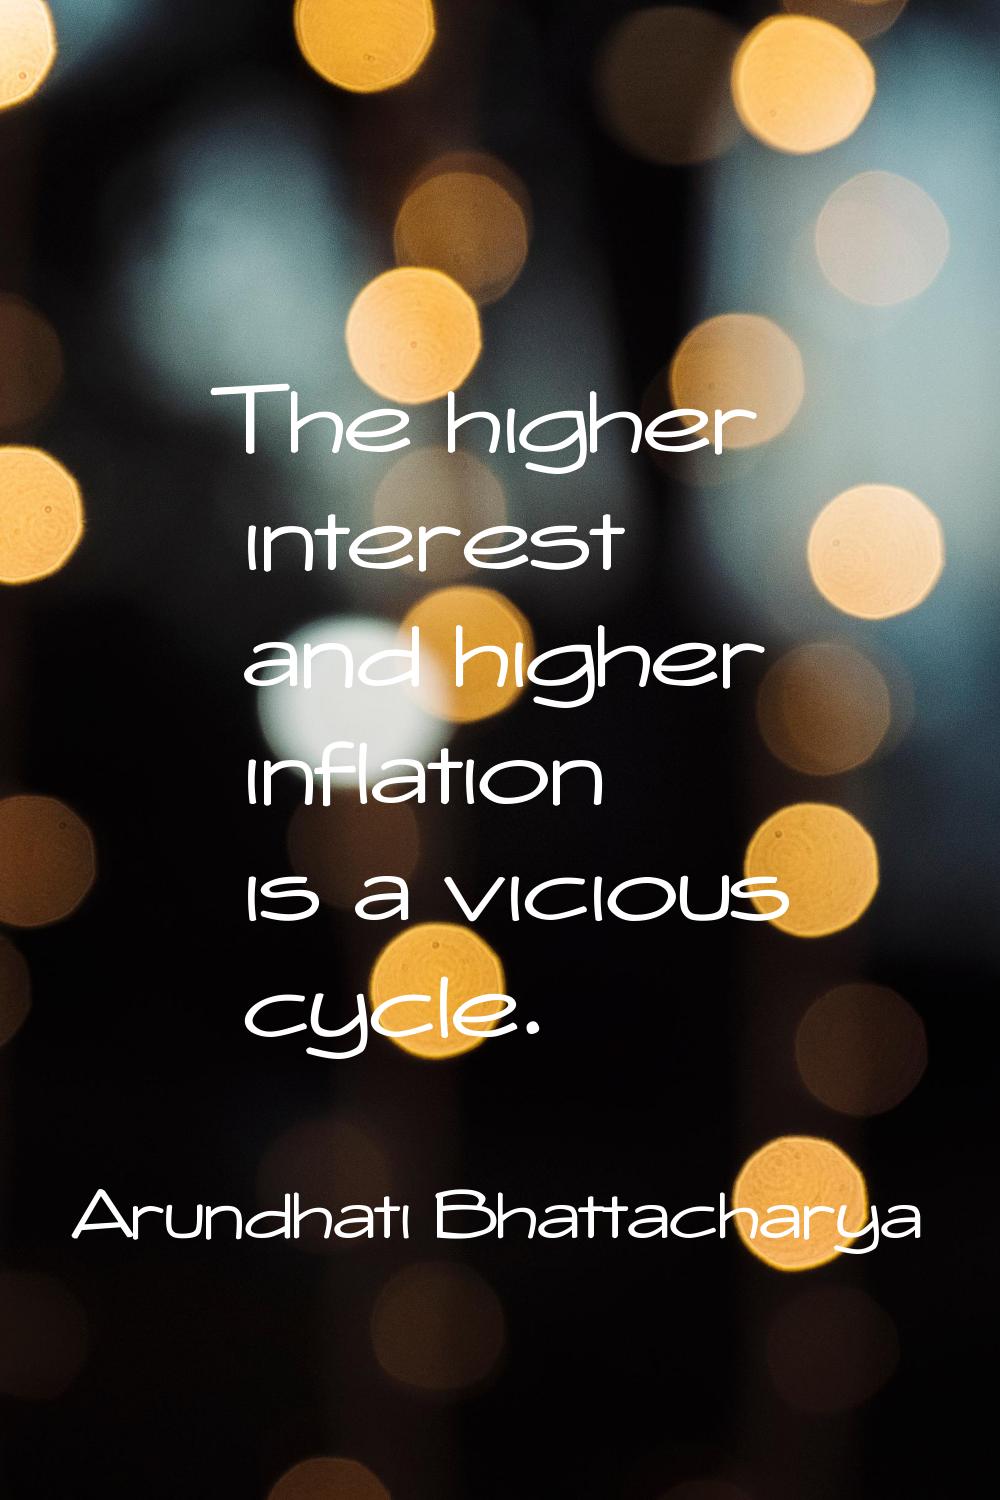 The higher interest and higher inflation is a vicious cycle.